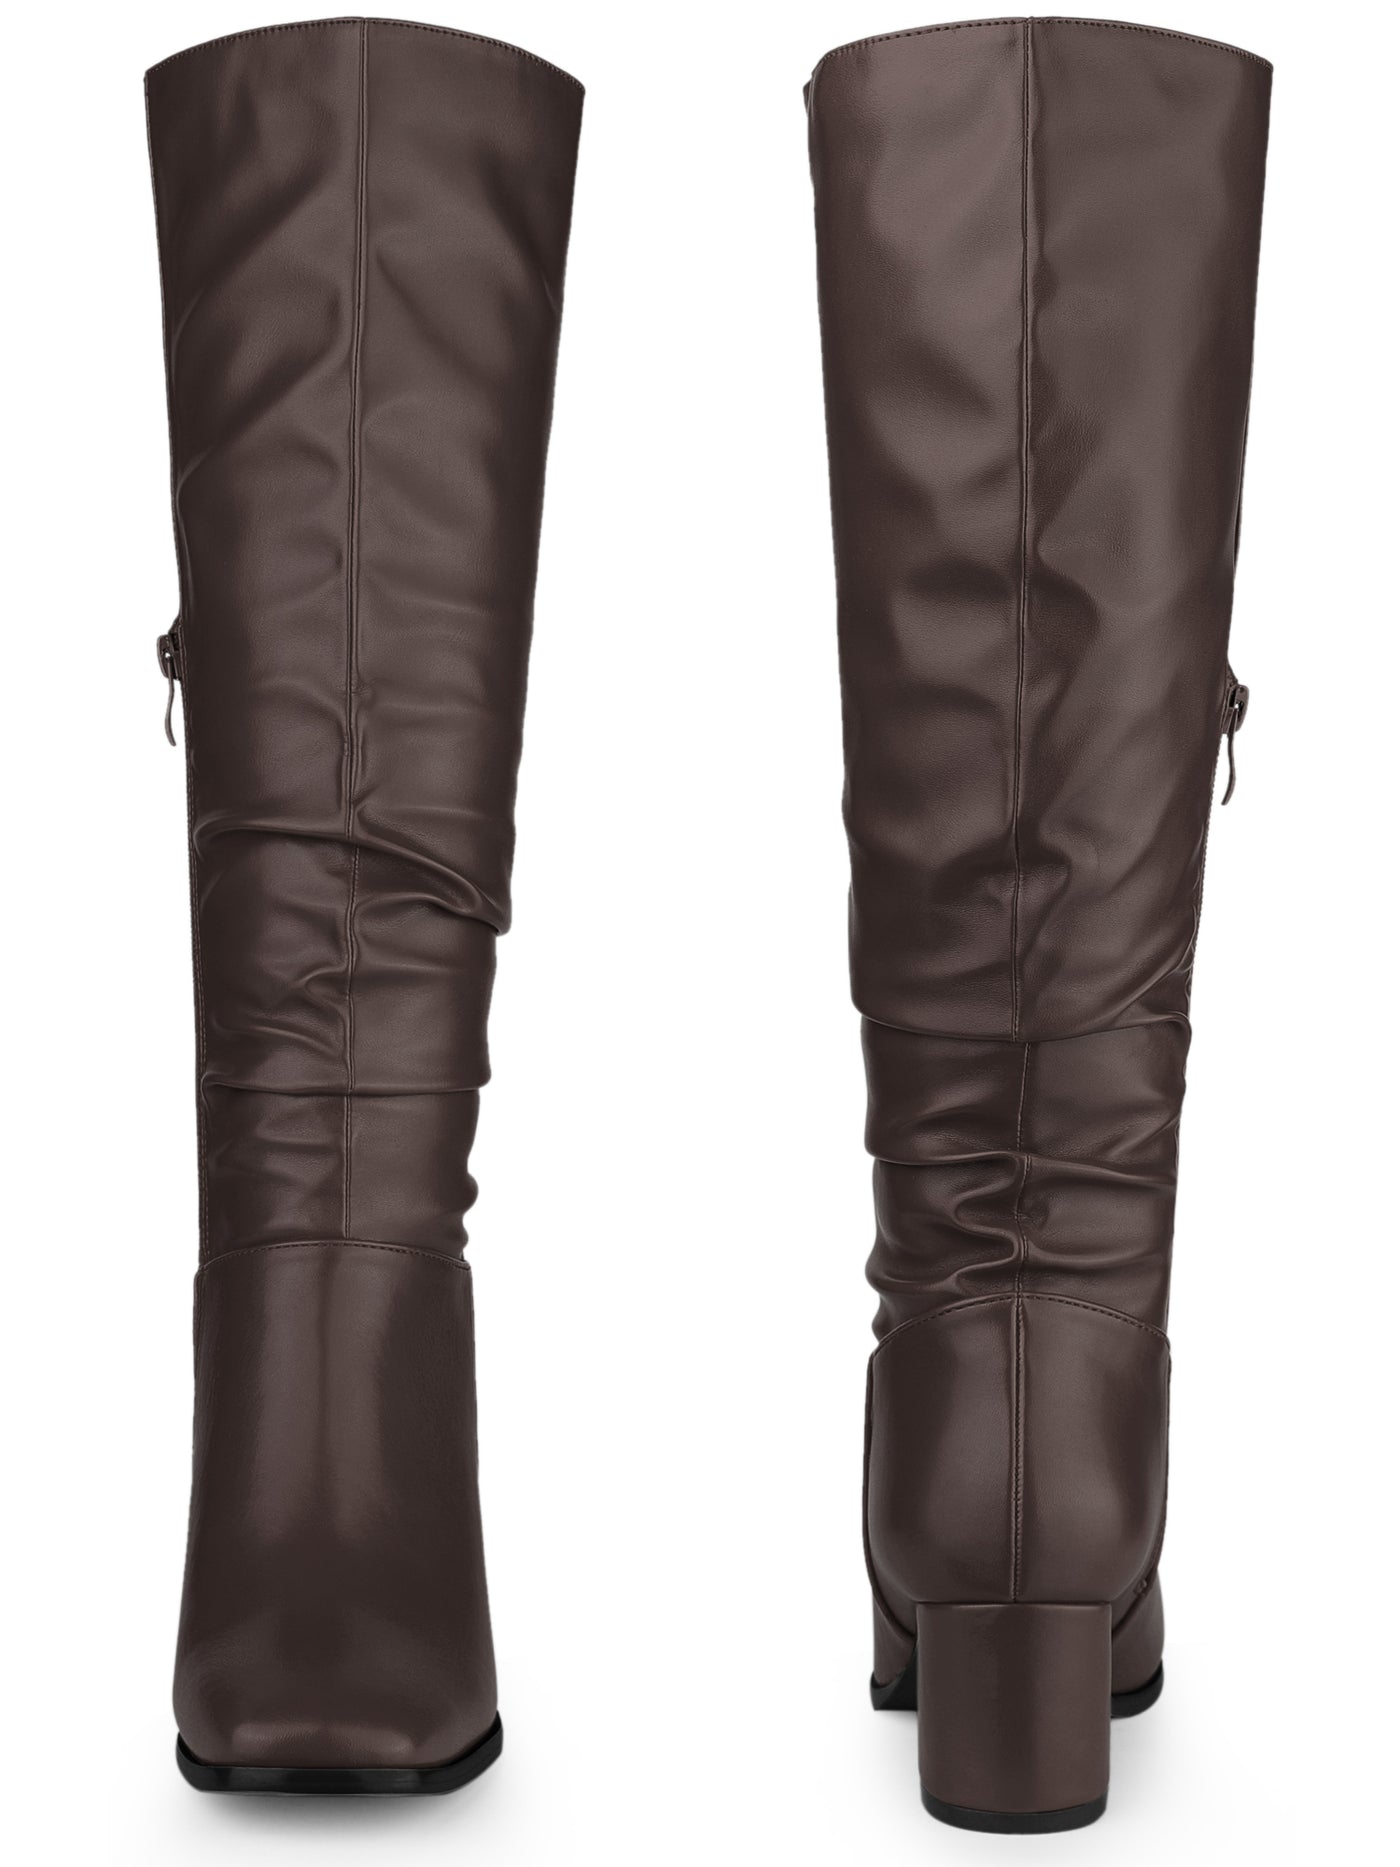 Bublédon Perphy Slouchy Square Toe Chunky Heel Knee High Boots for Women